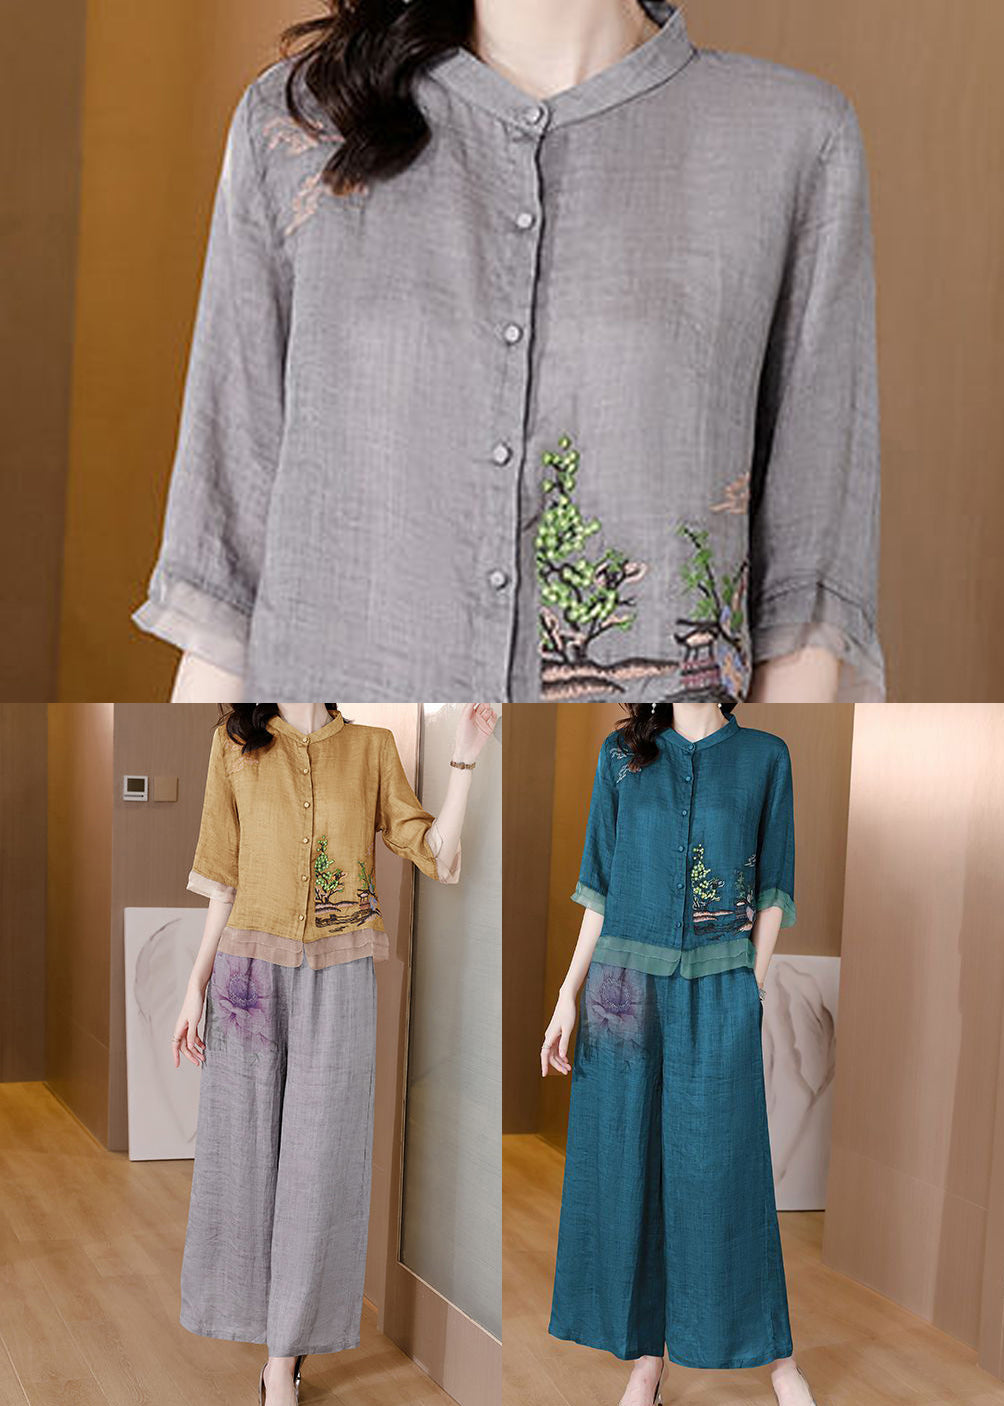 Yellow Patchwork Linen Two Pieces Set Stand Collar Embroideried Summer LY2786 - fabuloryshop